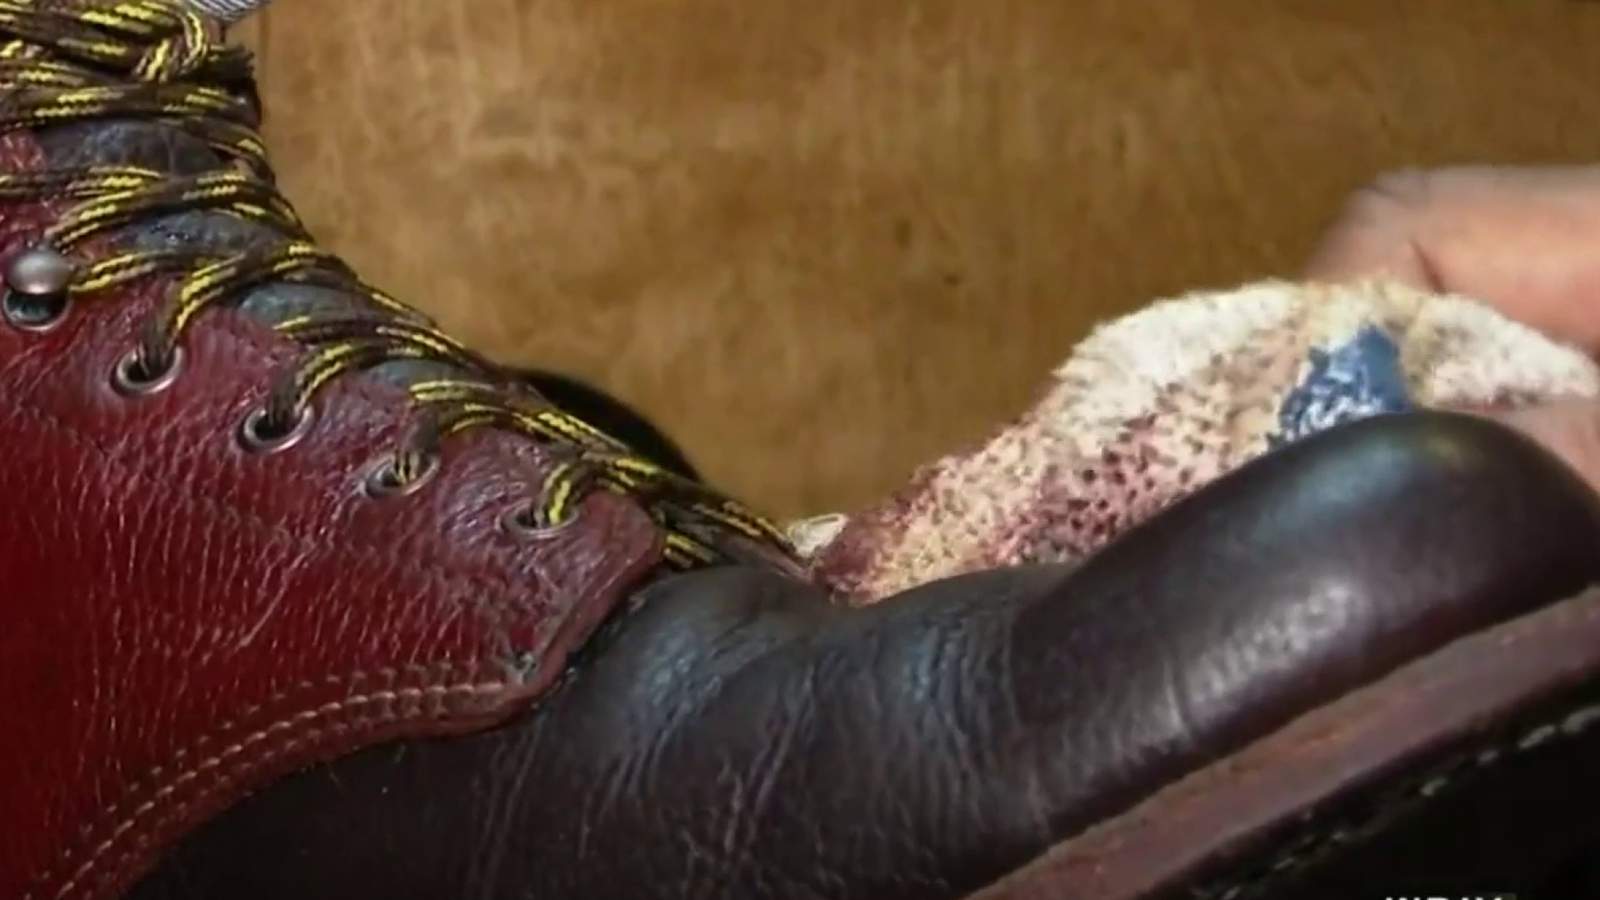 This “Shoe Doctor” is good for the sole